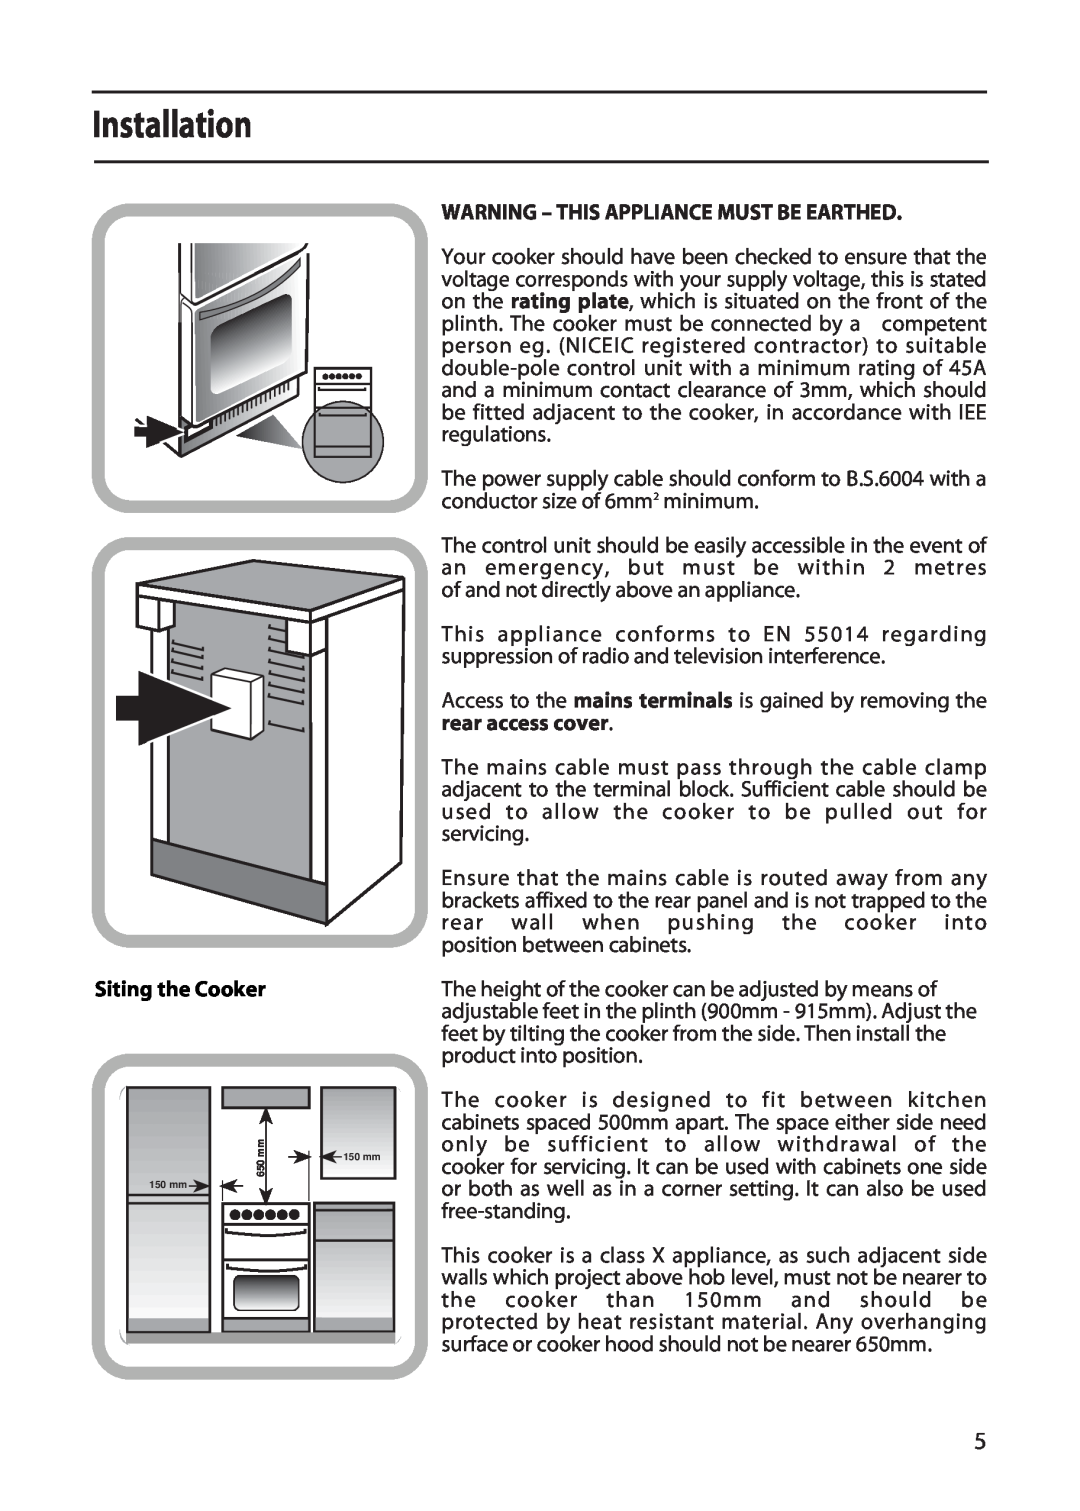 Creda X252E manual Installation, Siting the Cooker, Warning - This Appliance Must Be Earthed 